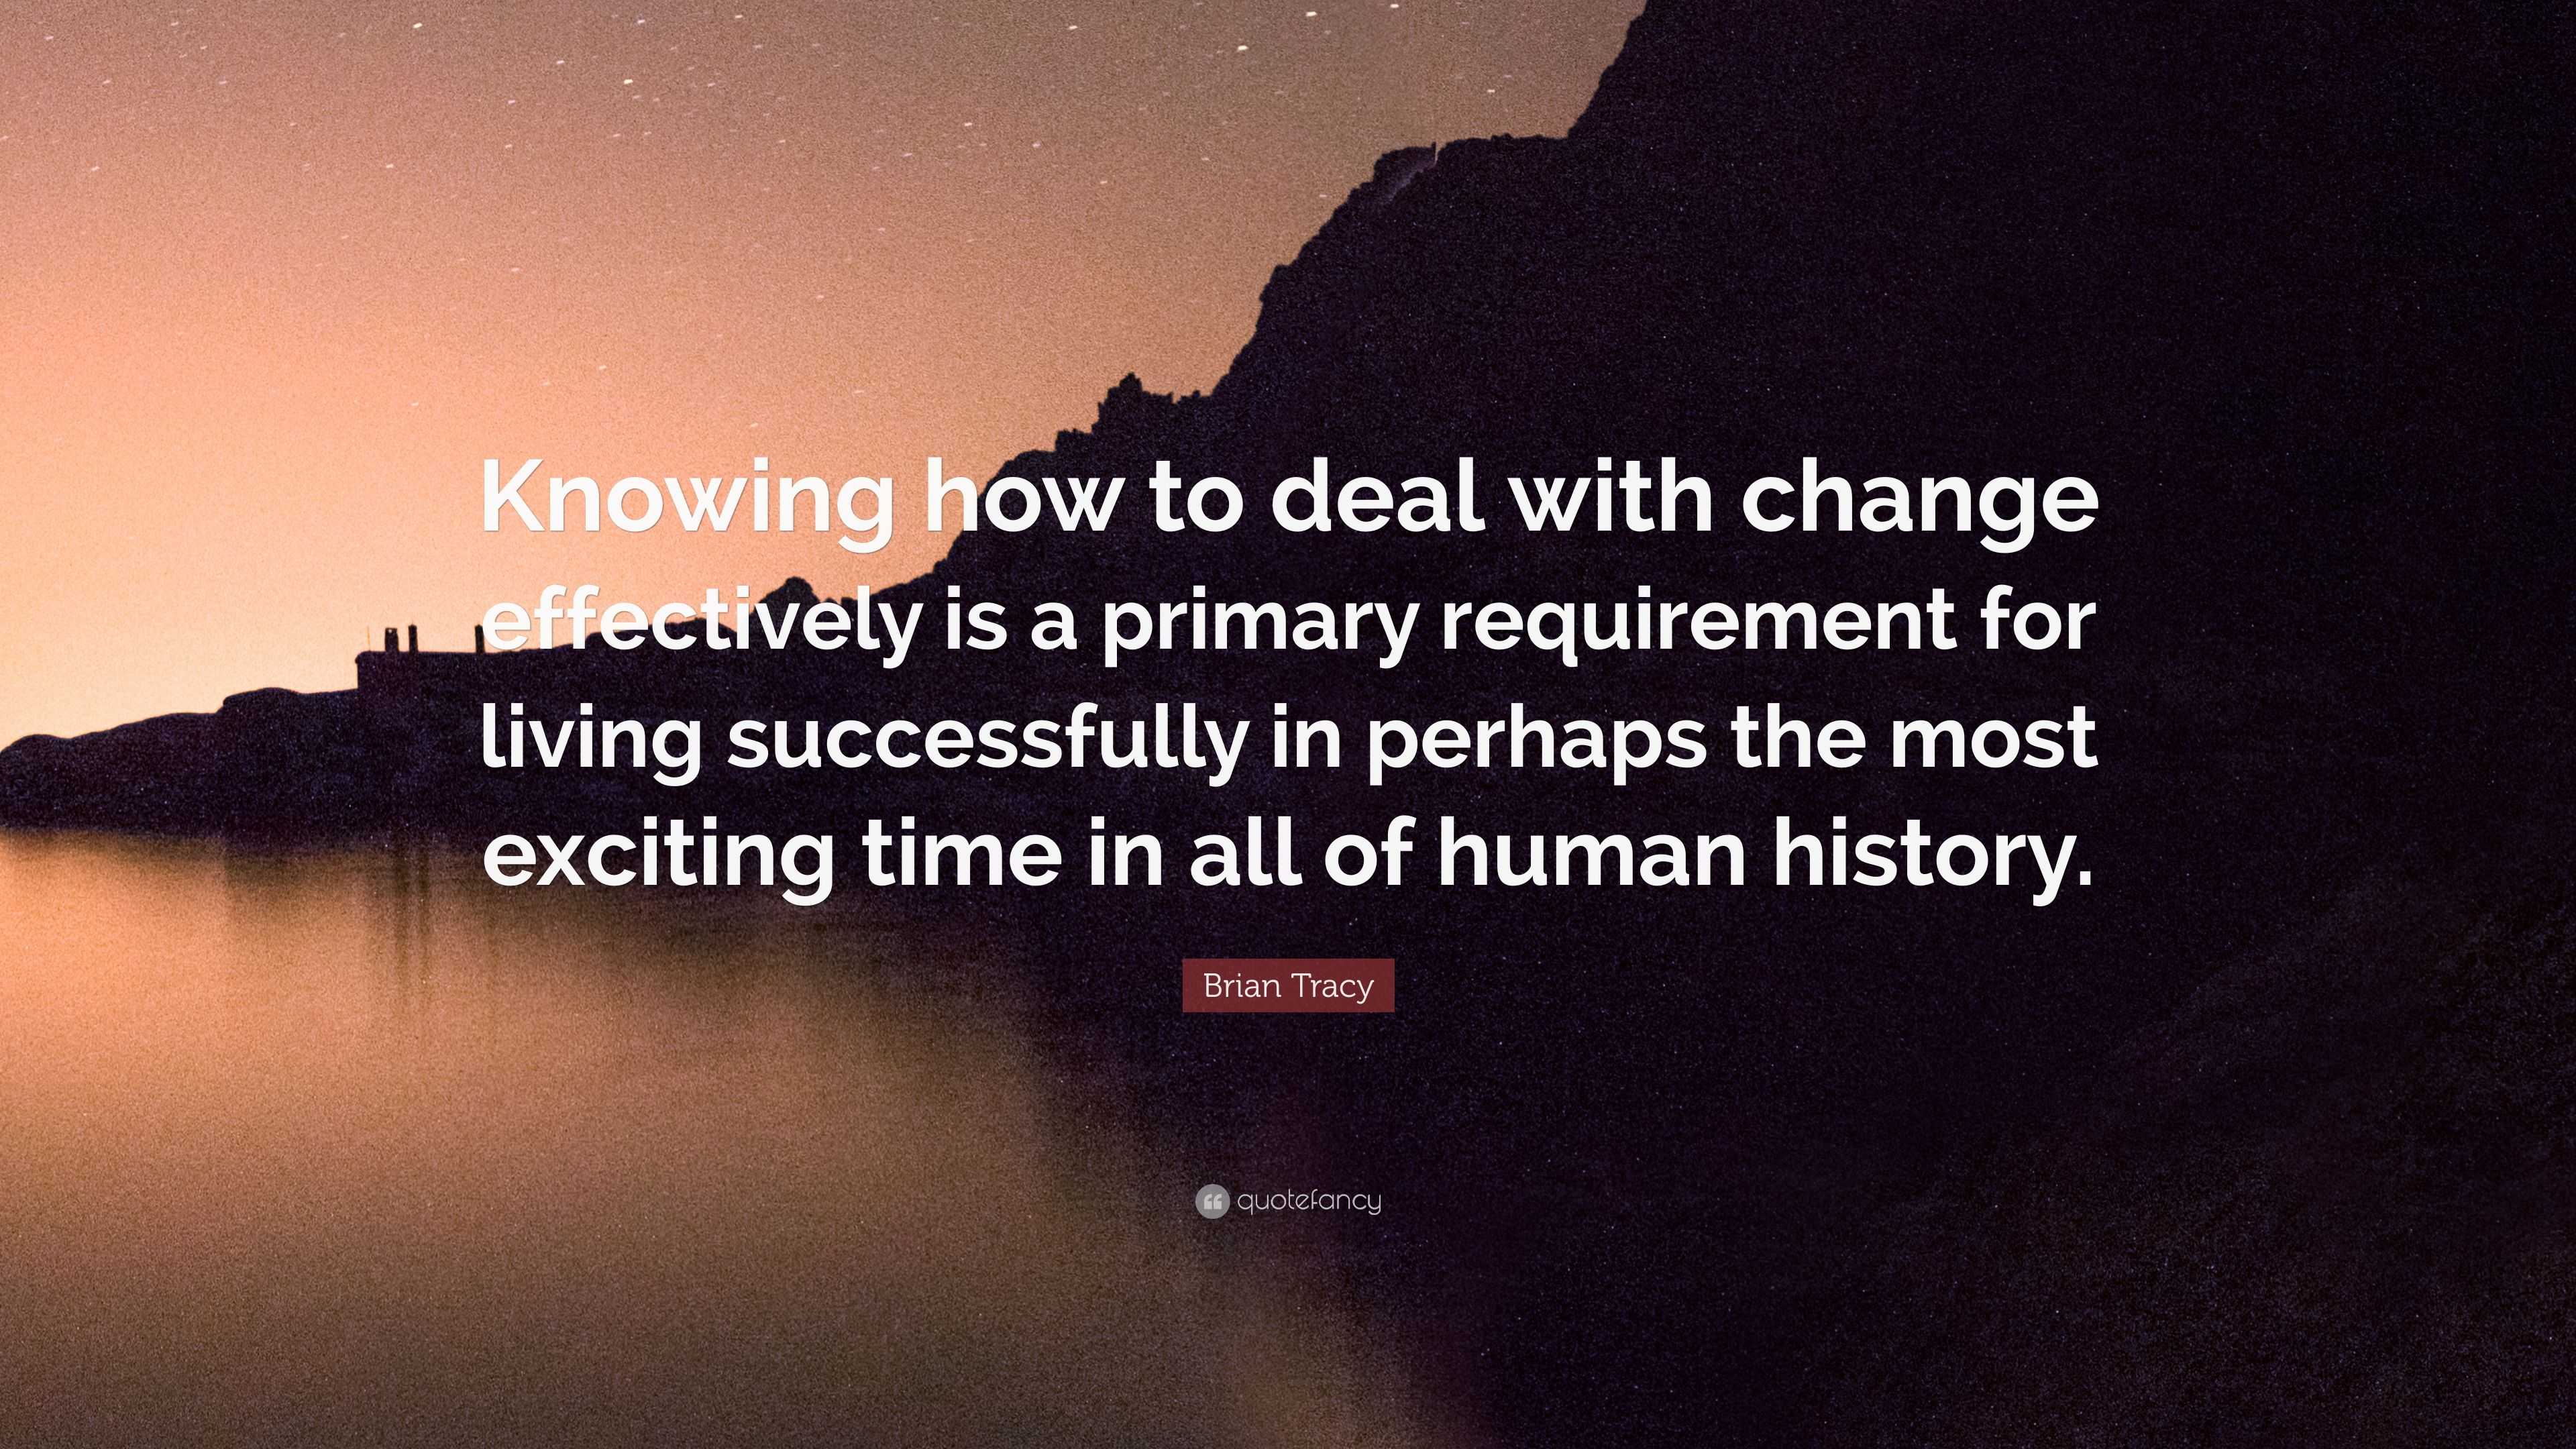 Brian Tracy Quote: “Knowing how to deal with change effectively is a